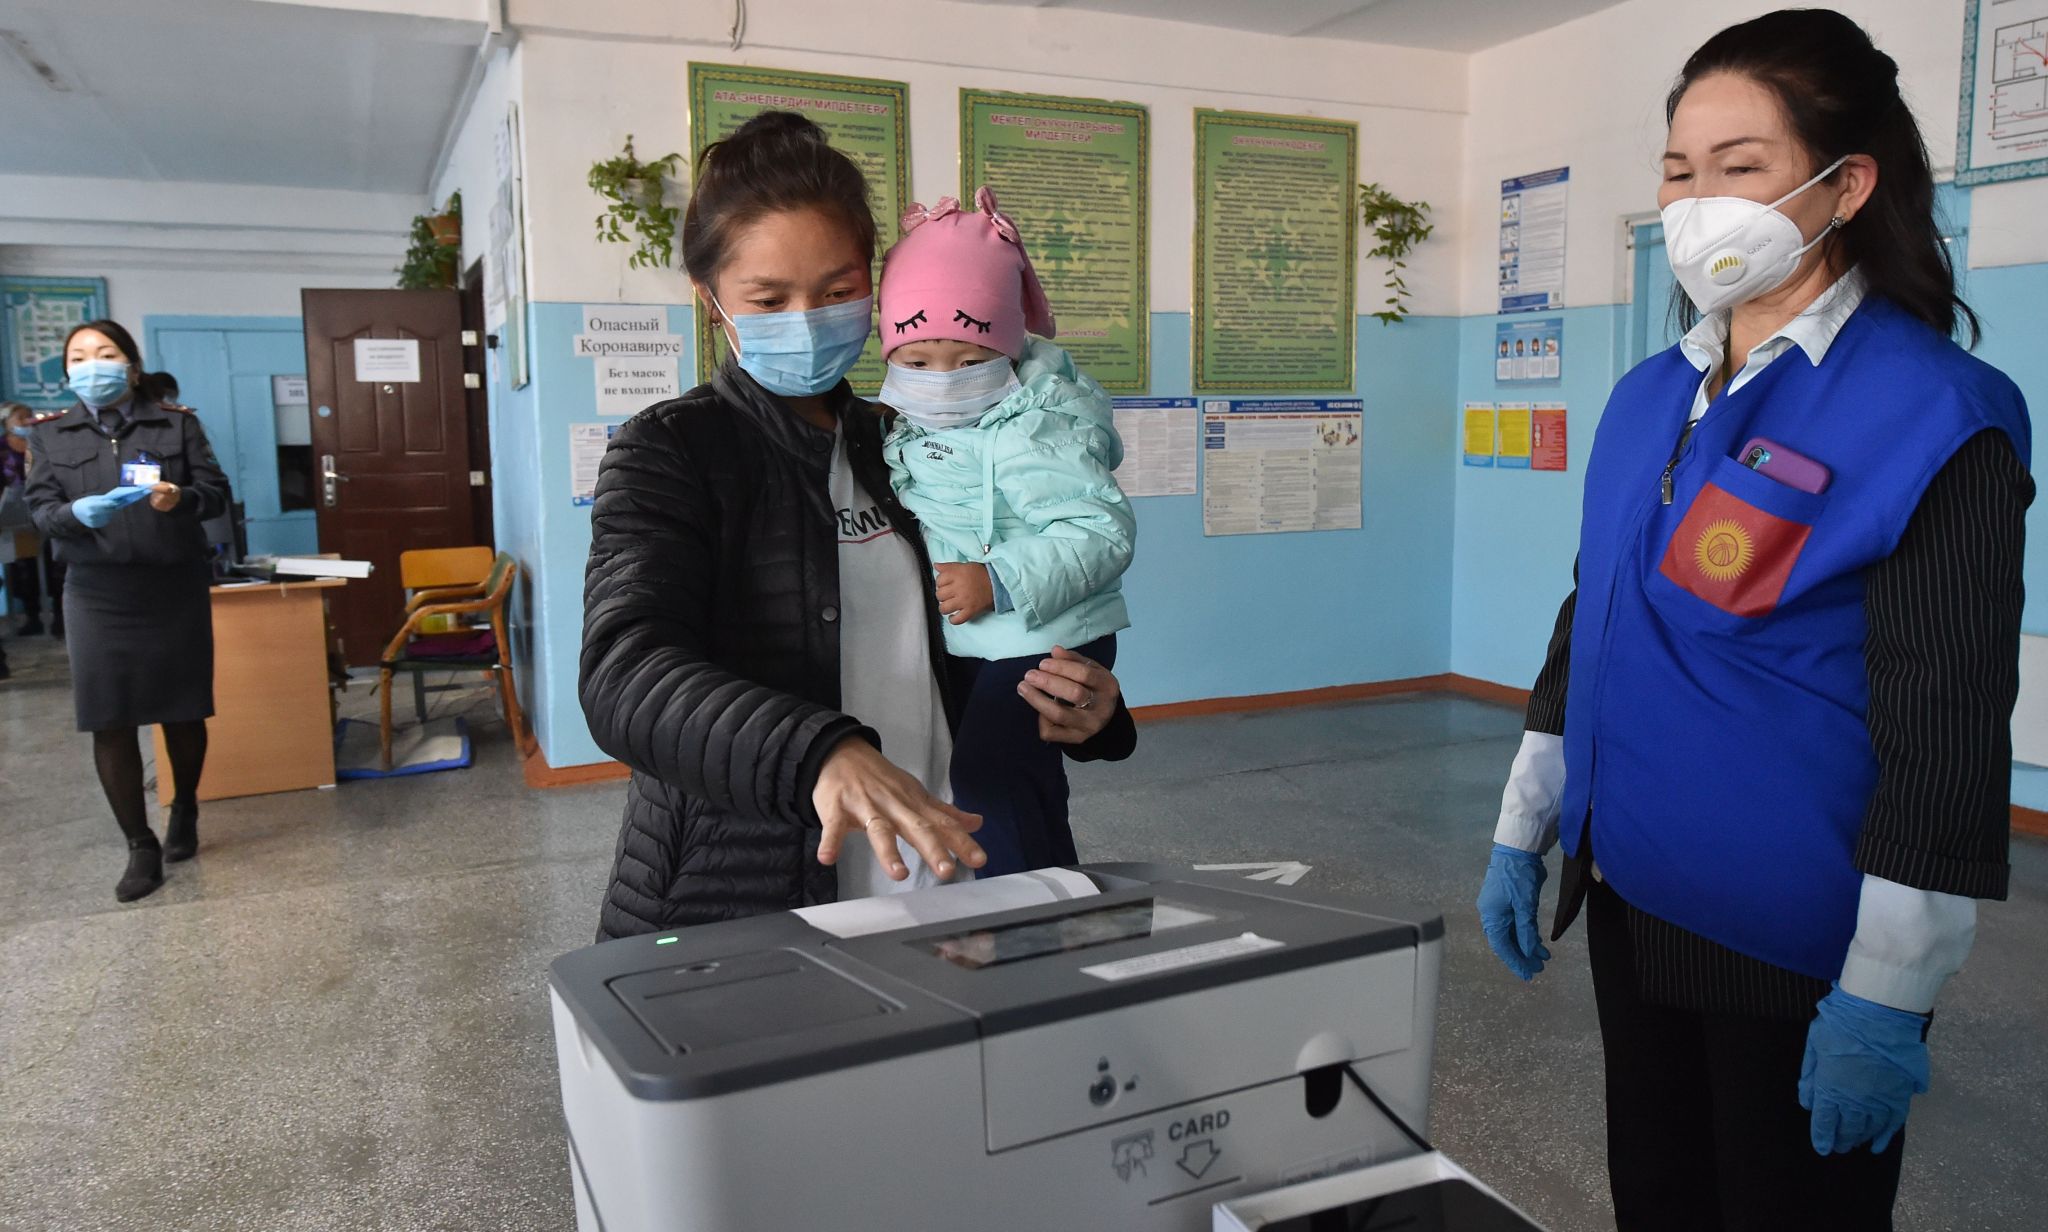 A woman holding a child casts her ballot